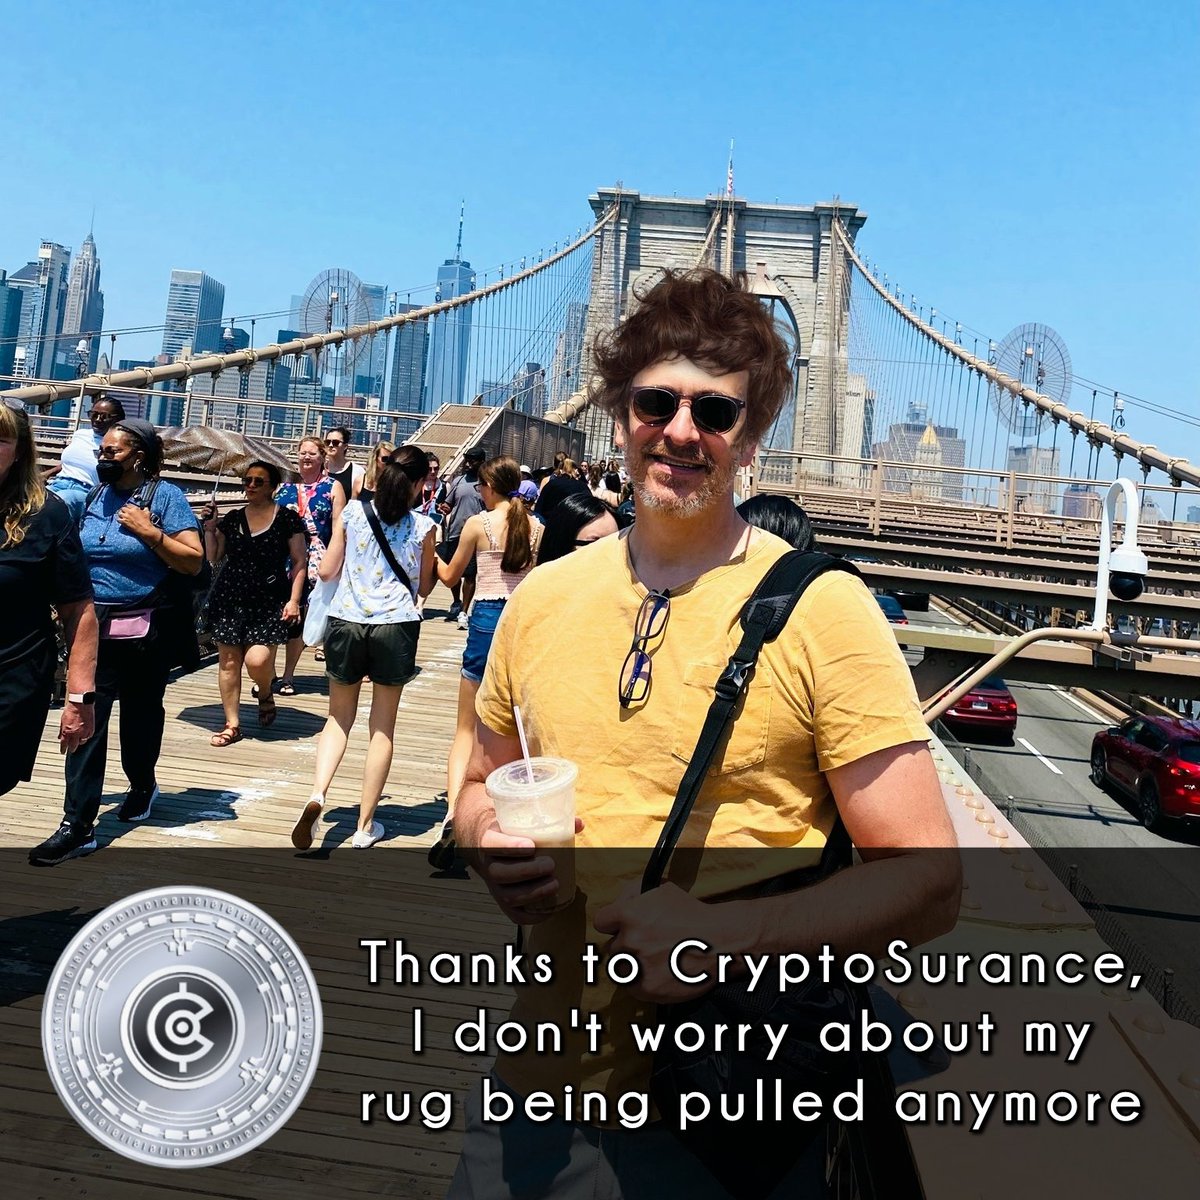 All #crypto investors need a good safety net.

Thanks to #CryptoSurance from @Shield_Coin, @GoToddHart
has one less worry 👍

#BestHair #BestRugEver #NoMoreRugPull #LivingTheDream #ISwearItsNotAToupee

What do you think @SouthernComet87, @Honeybadger1314, @DeFiConnection?